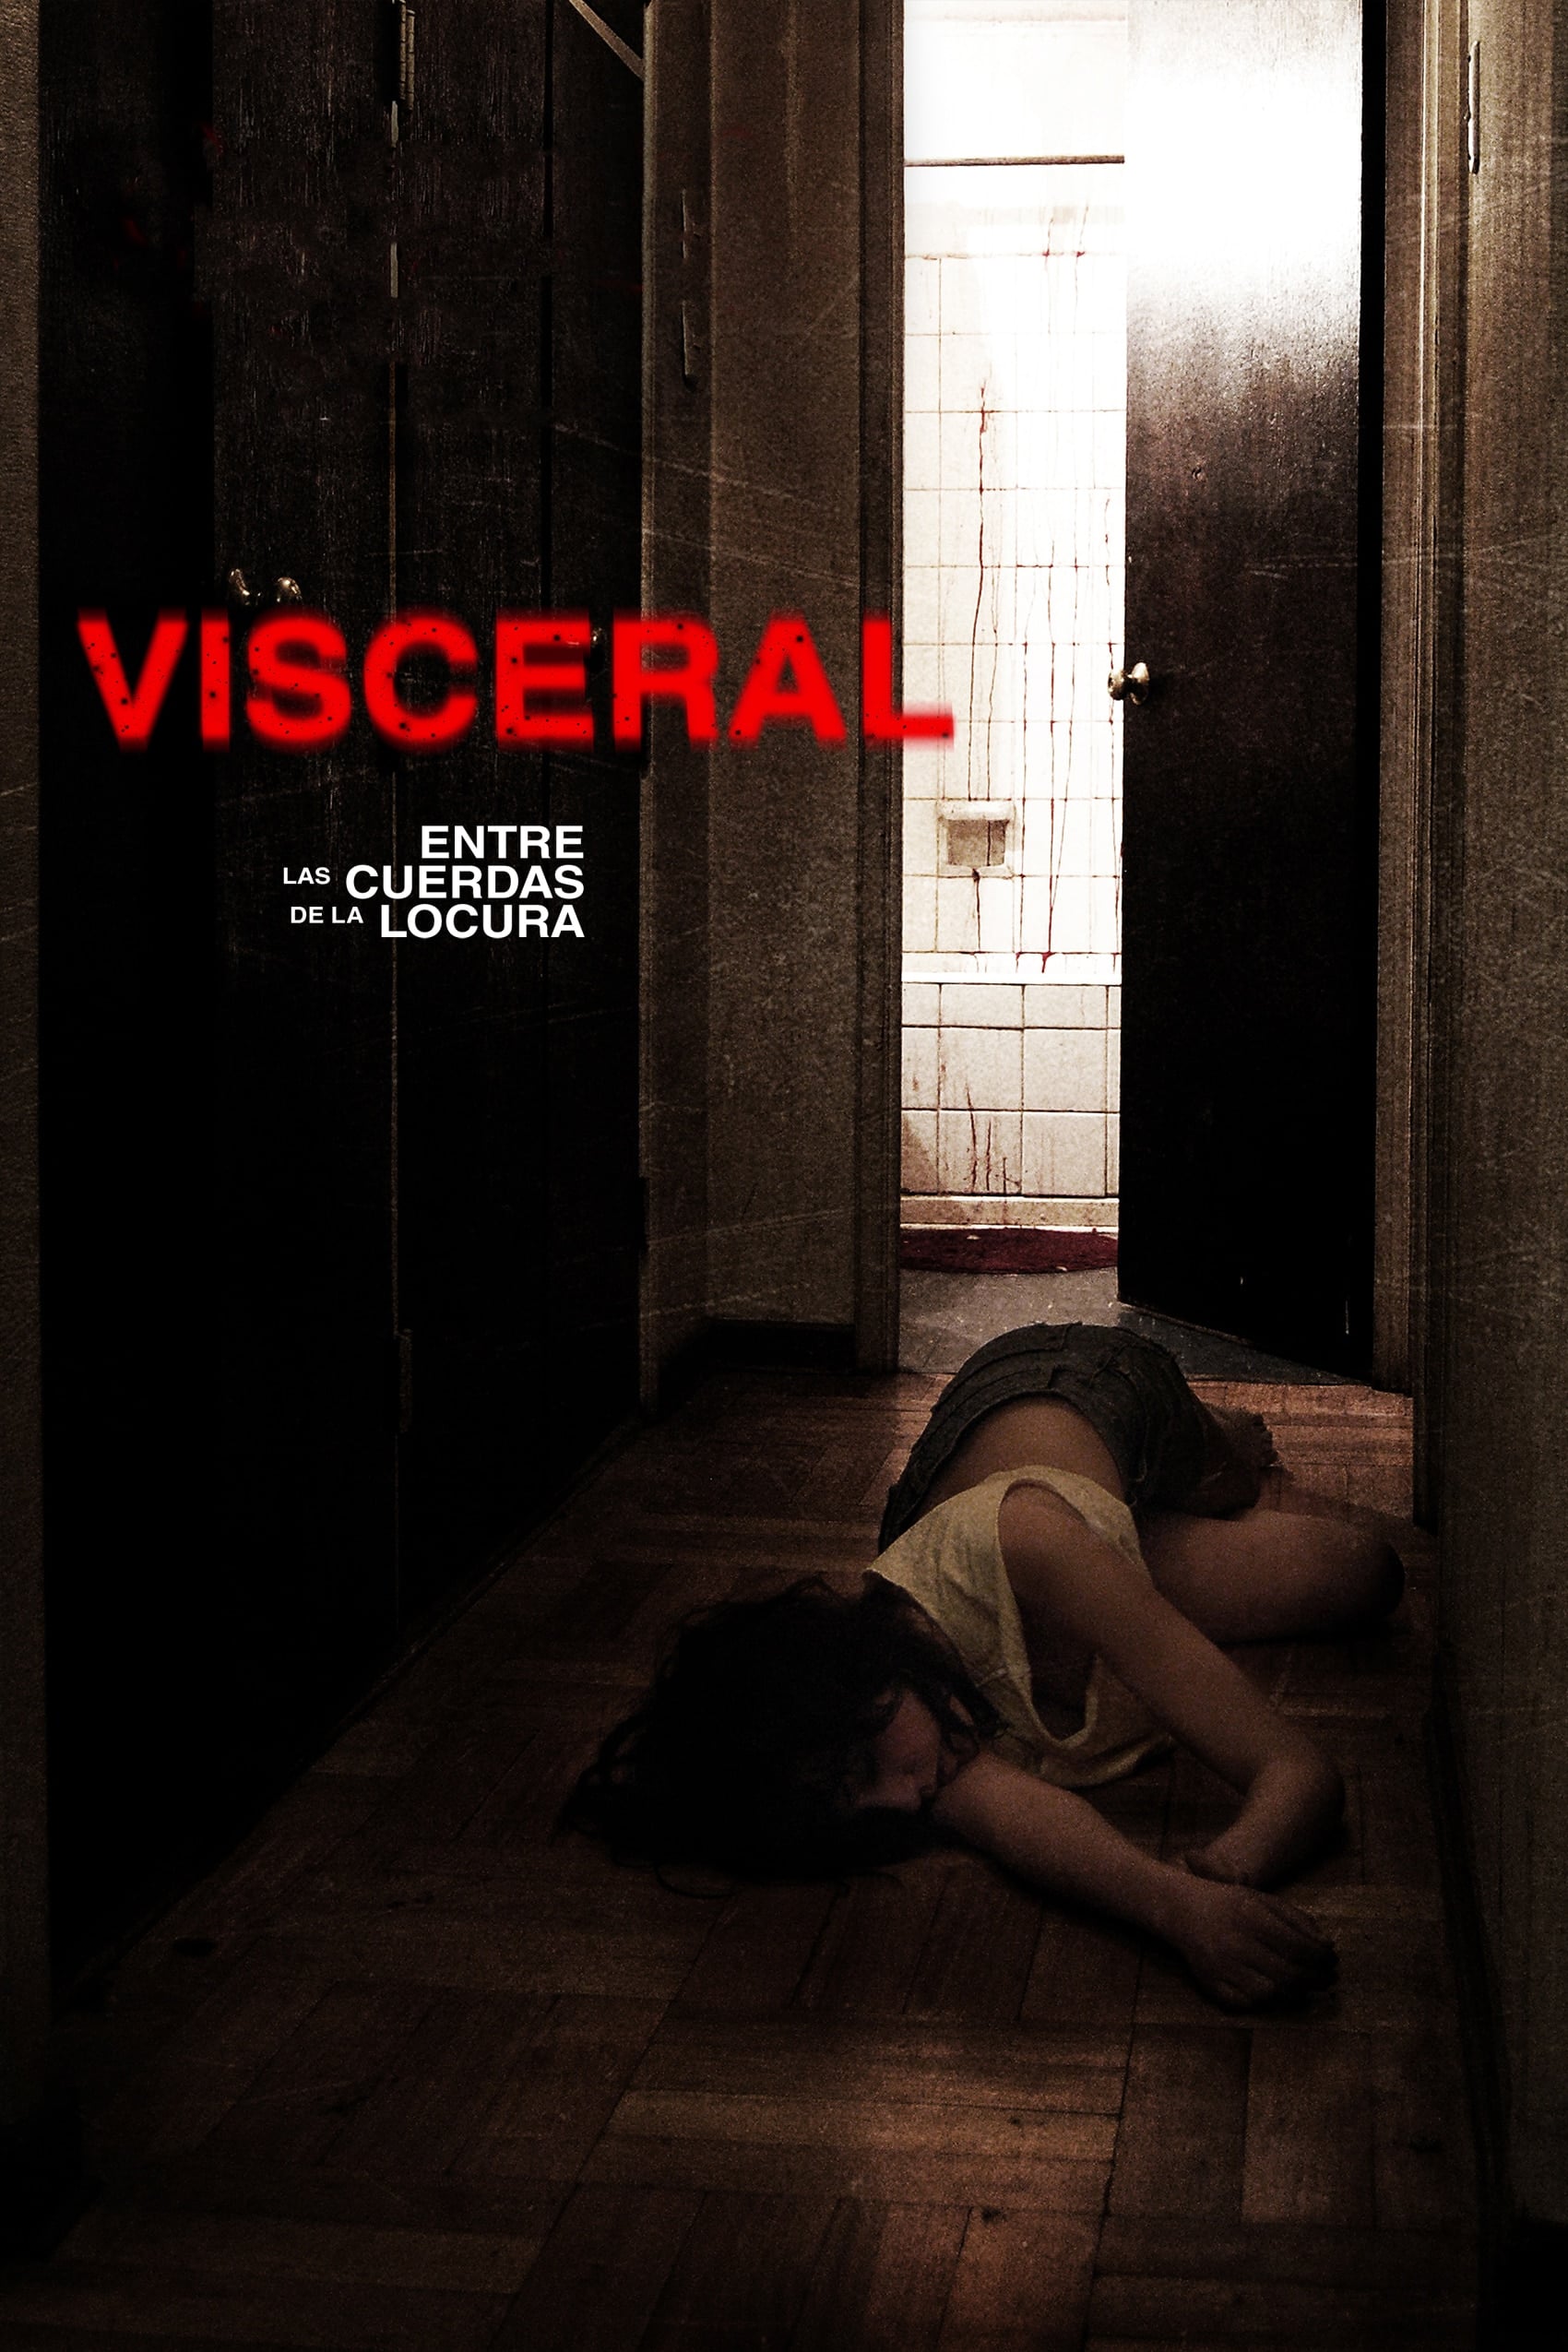 Visceral: Between the Ropes of Madness